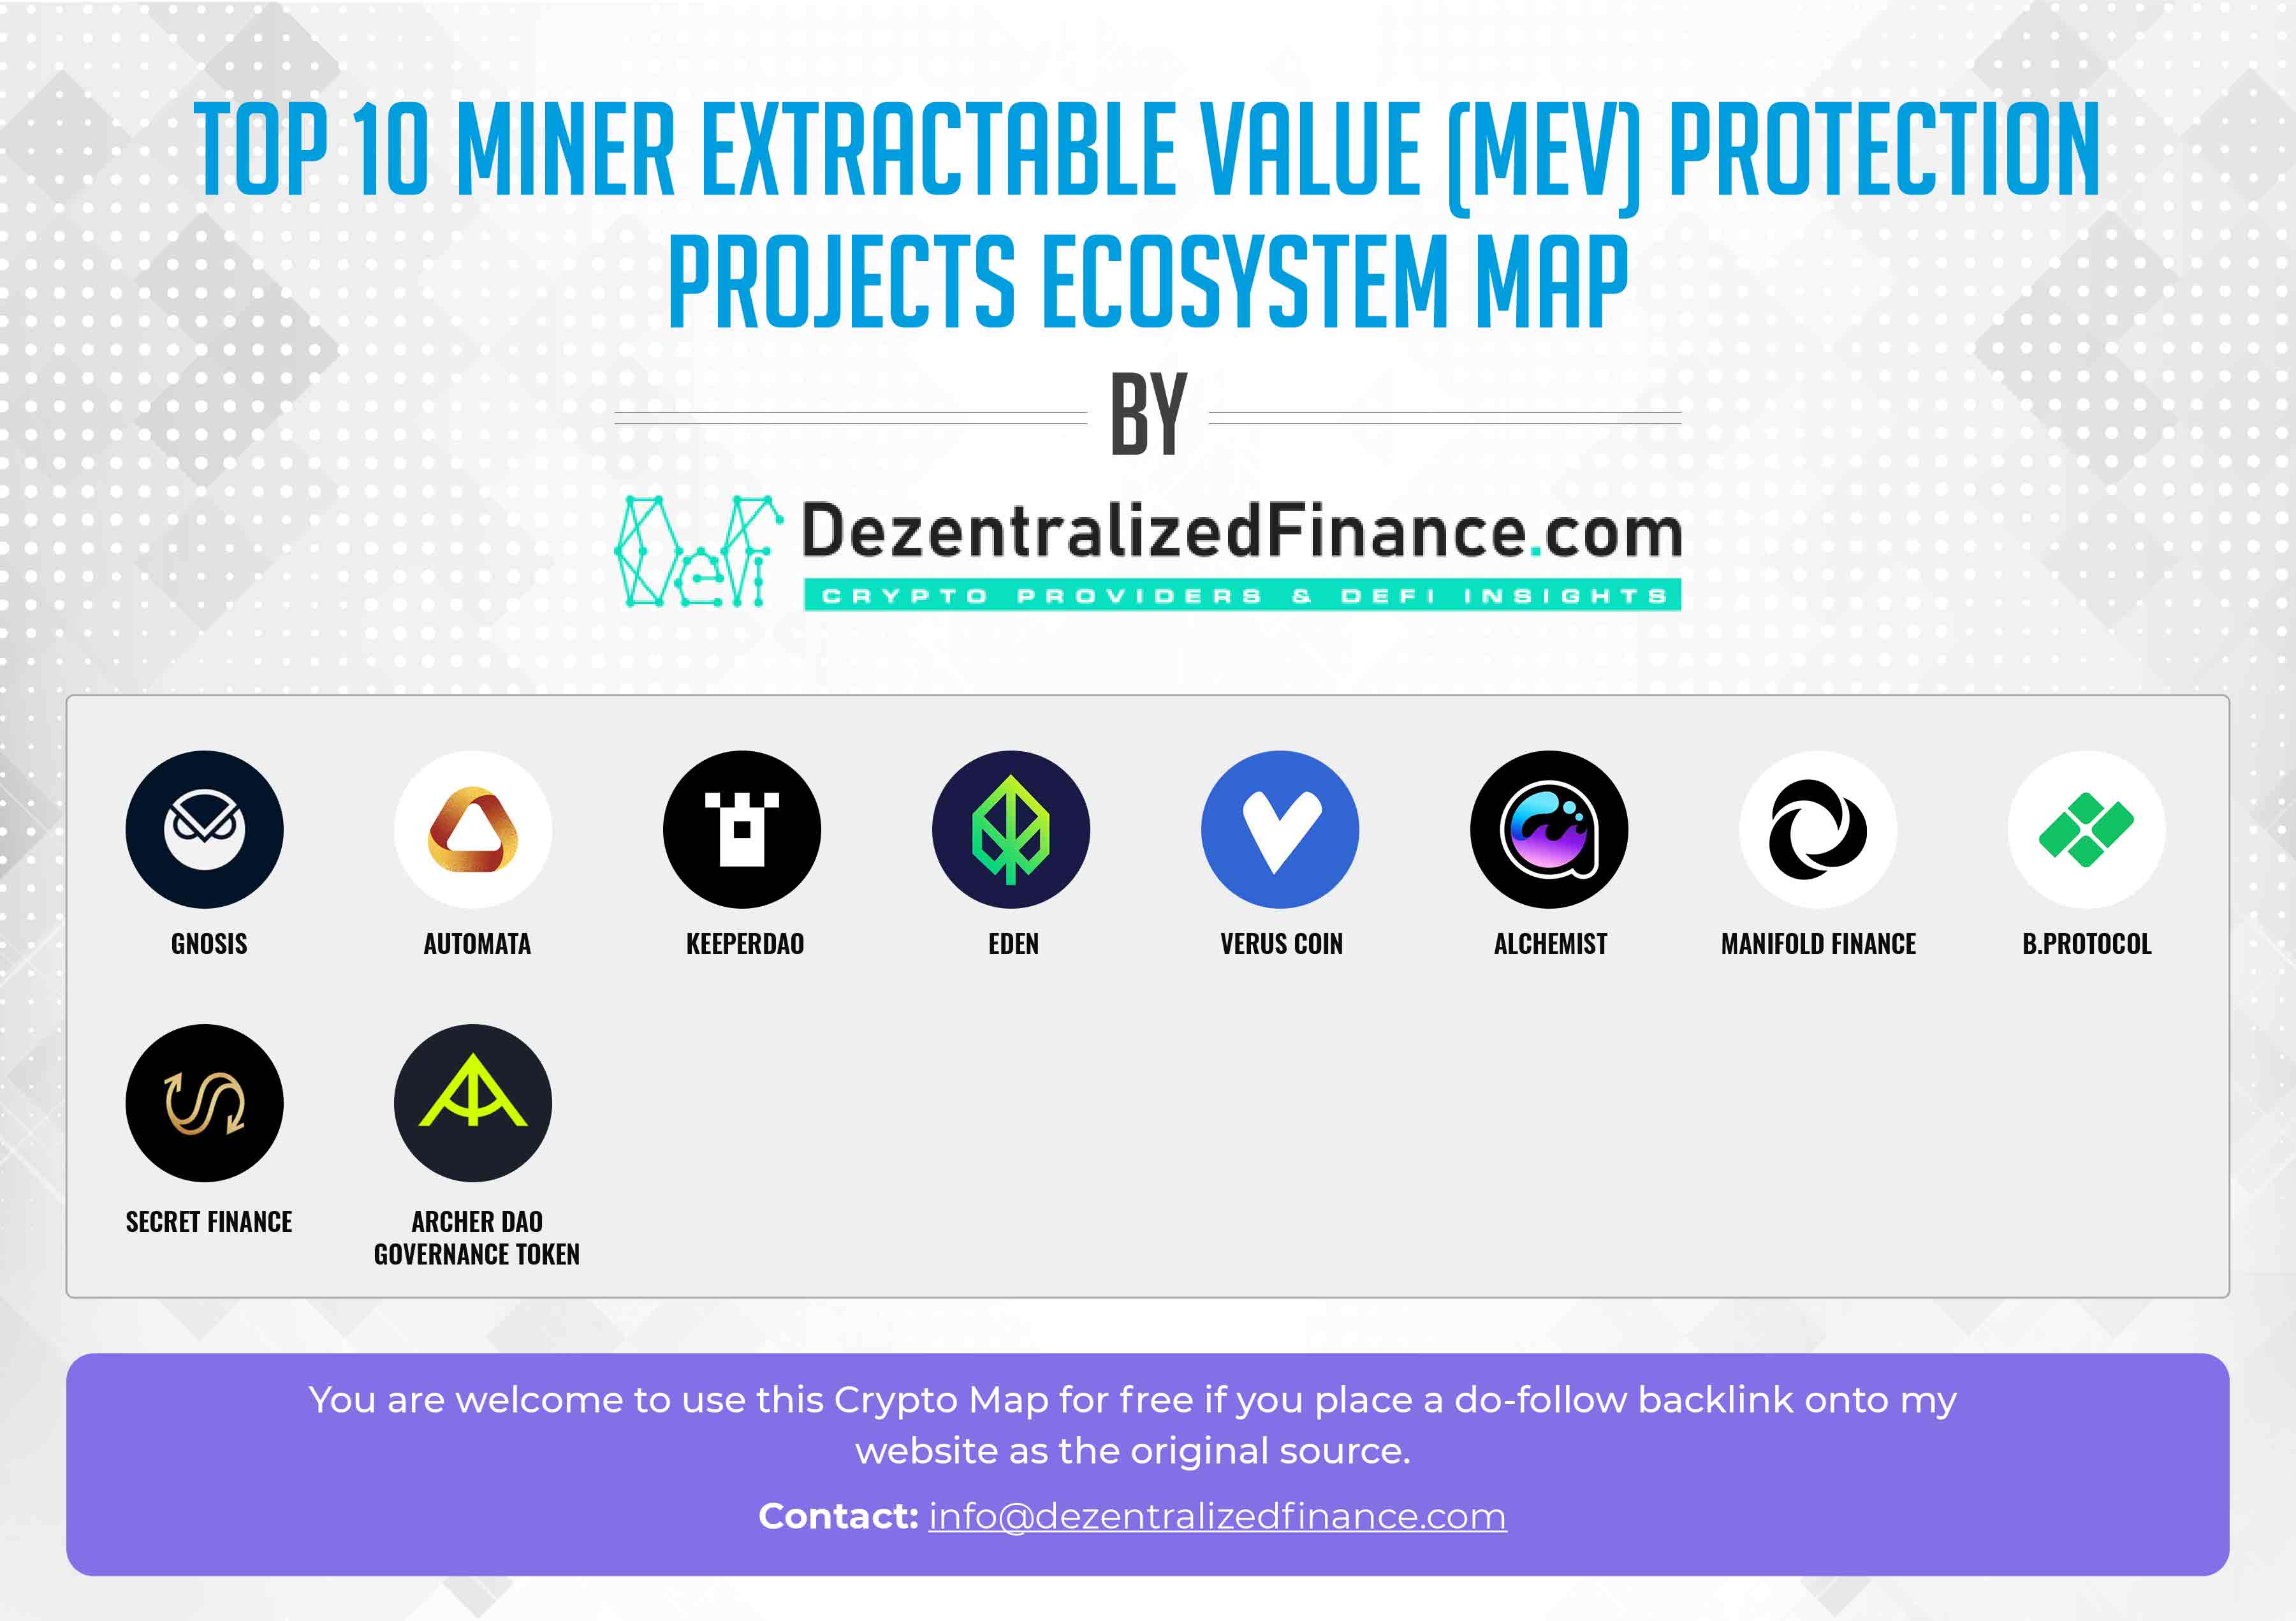 Top 10 Miner Extractable Value MEV Protection Projects Ecosystem